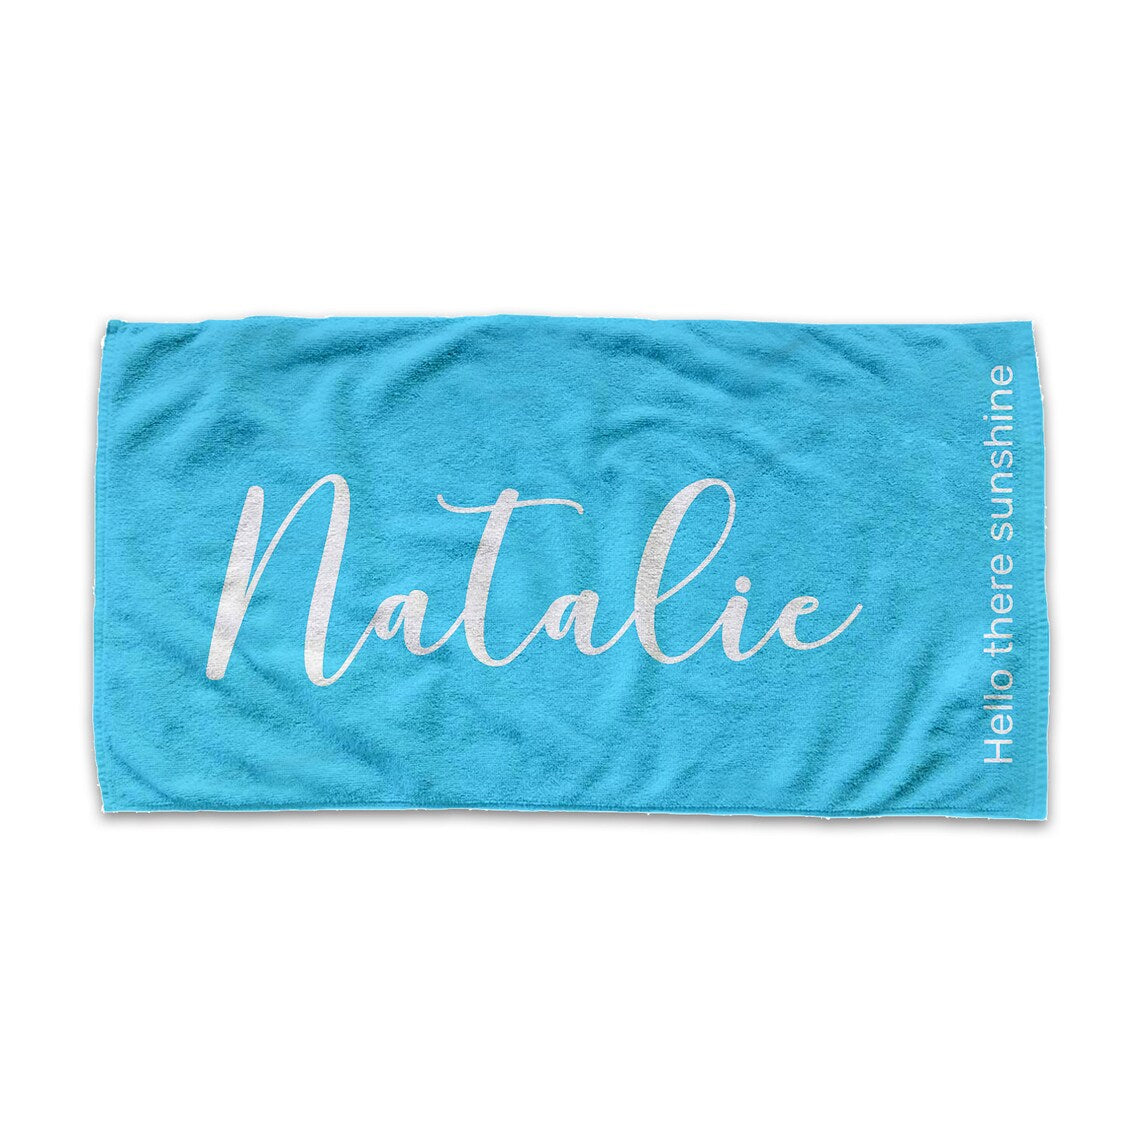 Personalized 30" x 60" Summer Camp, Vacation, Beach Towel, Bath Towel, Pool Towel, Beach Towel With Name